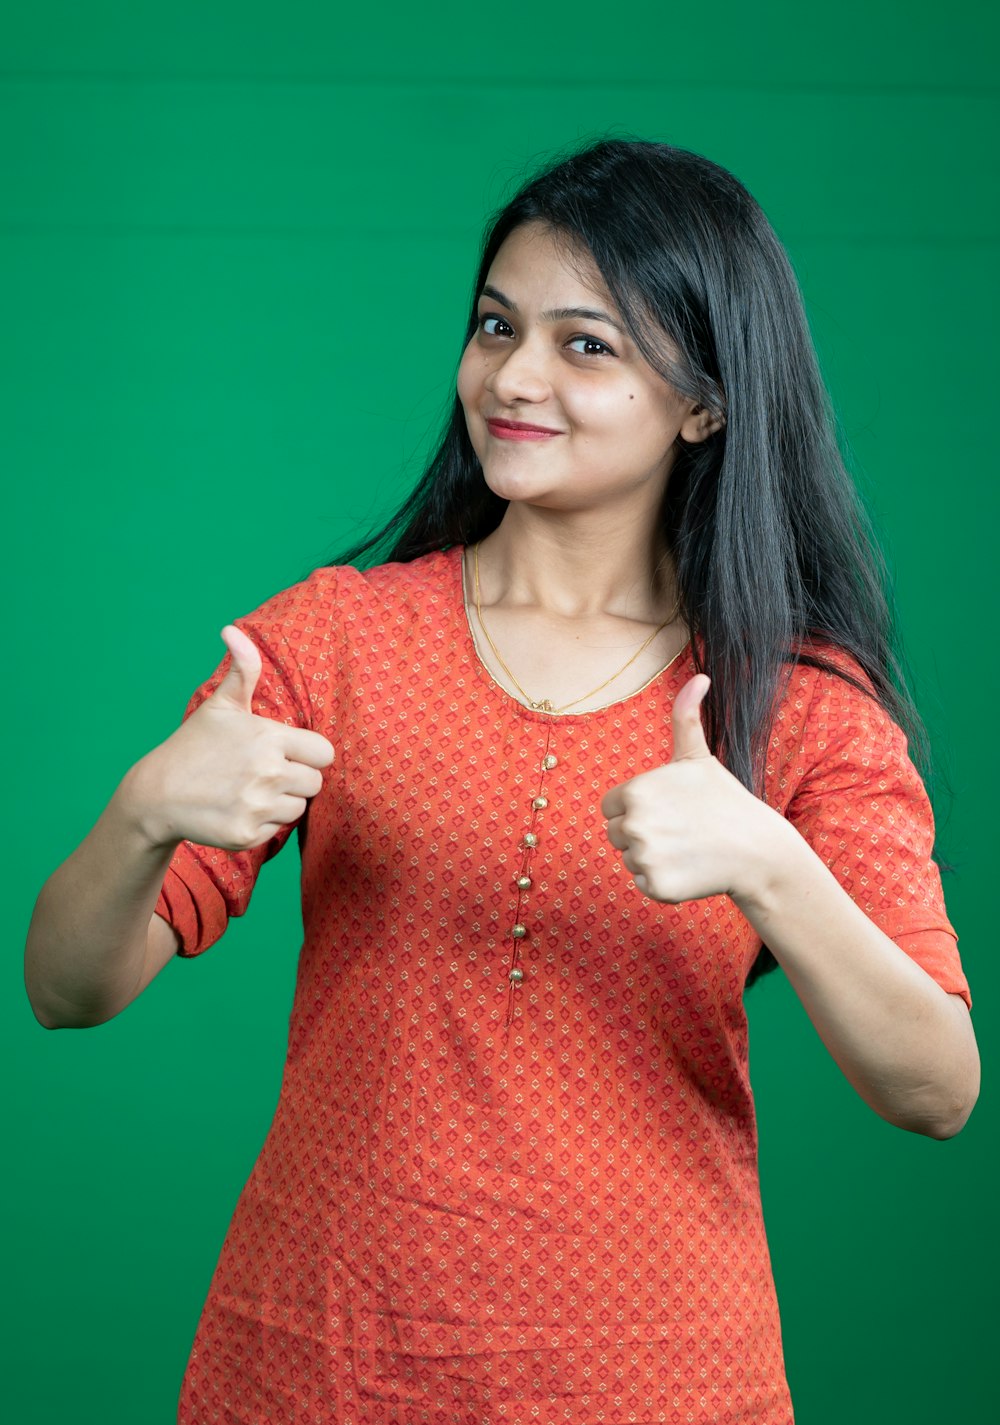 a woman giving a thumbs up sign in front of a green background